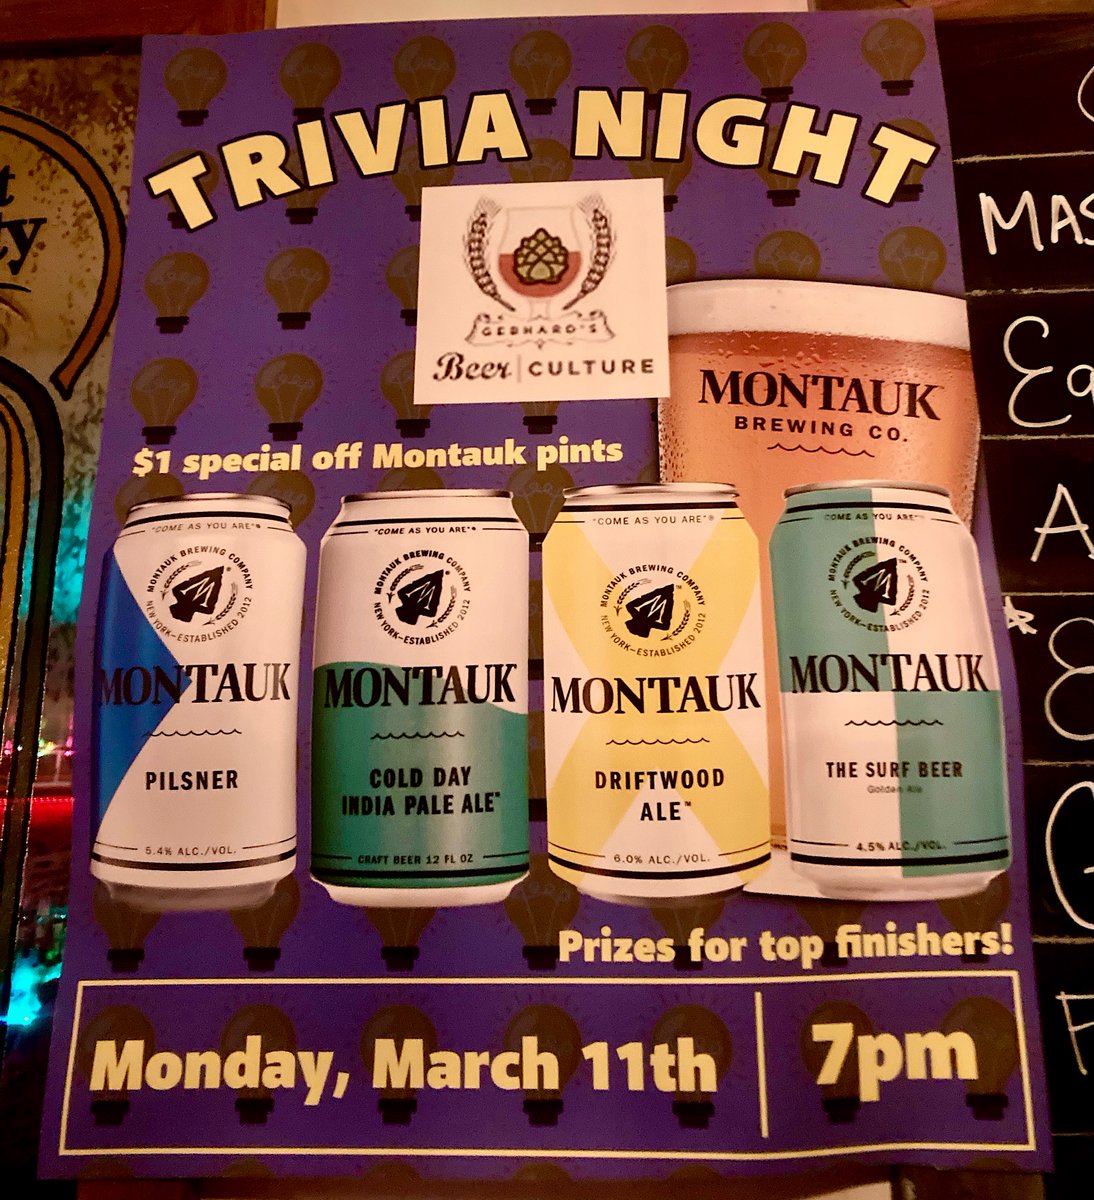 THIS MONDAY March 11th @ 7PM: HUGE Trivia Night sponsored by Montauk Brewing Co. $1 off Montauk pints & prizes for top finishers. BE THERE
#gebhardsbeerculture #craftbeer #upperwestside #upperwestsidebar #bottleshop #beer #beerlover #trivianight #immodesttrivia #montaukbrewingco